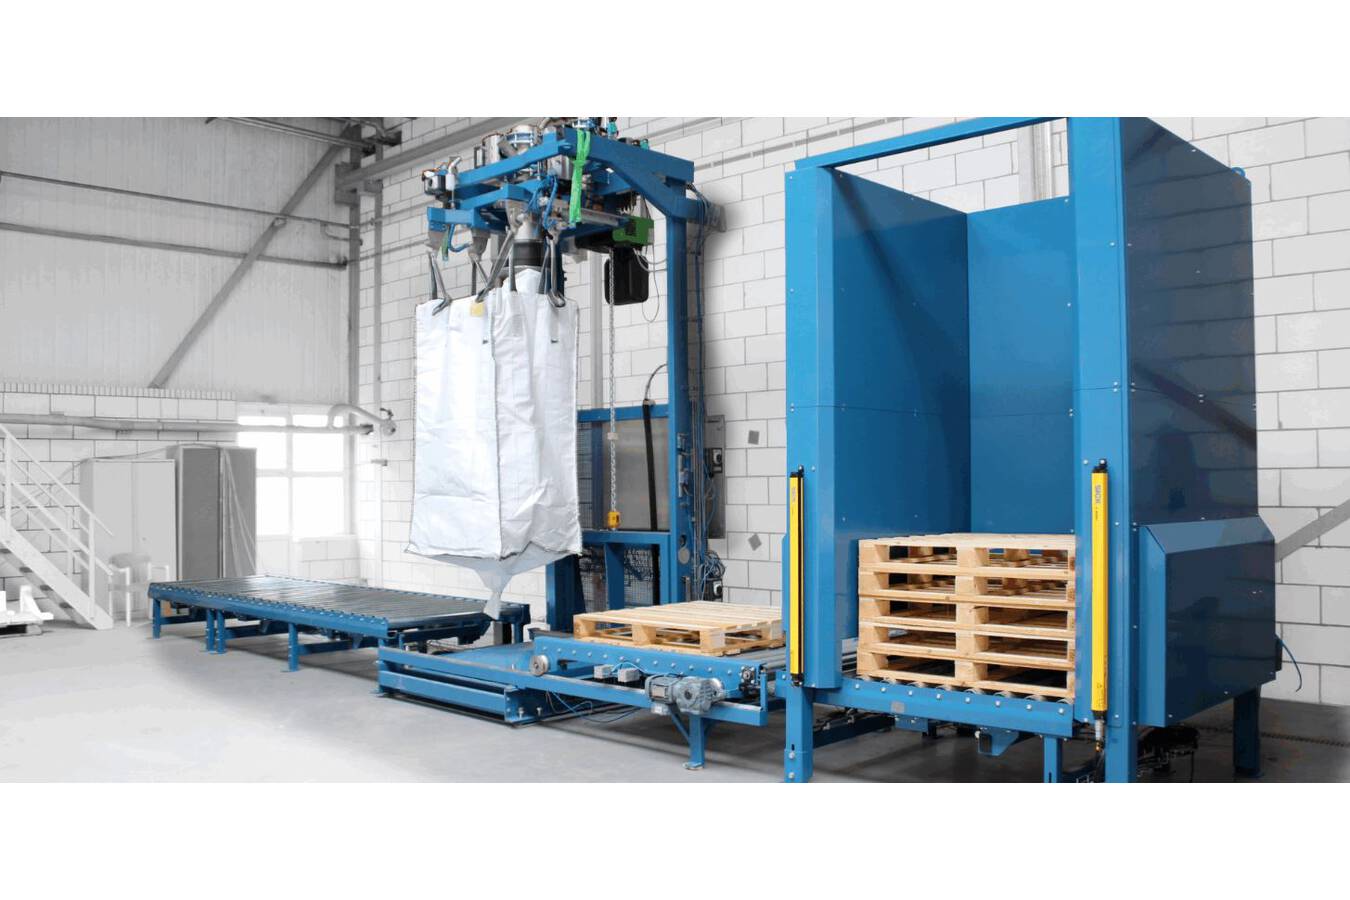 TBMA Big bag filling line: safe, ergonomic, optimal filling TBMA recently delivered a big bag filling line including pallet dispenser and conical vibrating table to a large chemical producer in the southern part of the Netherlands.